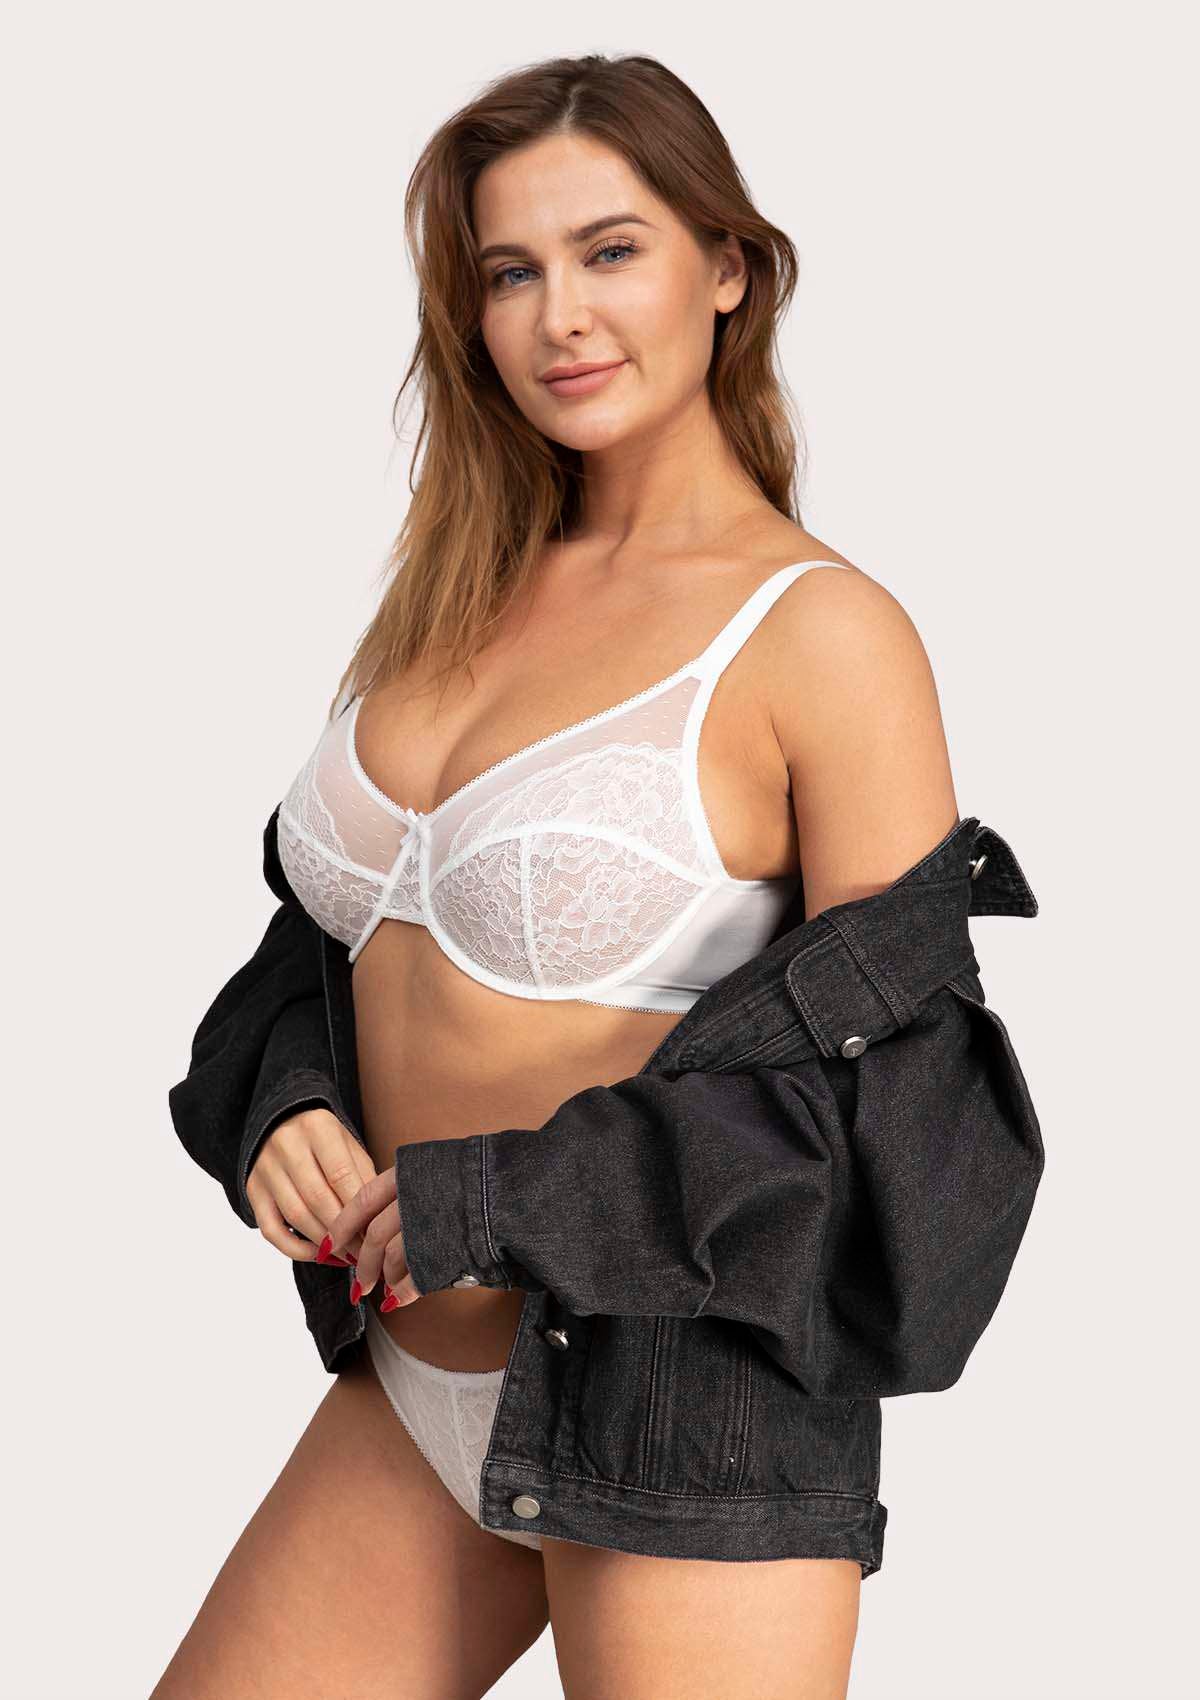 HSIA Enchante Lace Bra And Panties Set: Bra For Side And Back Fat - White / 40 / DD/E